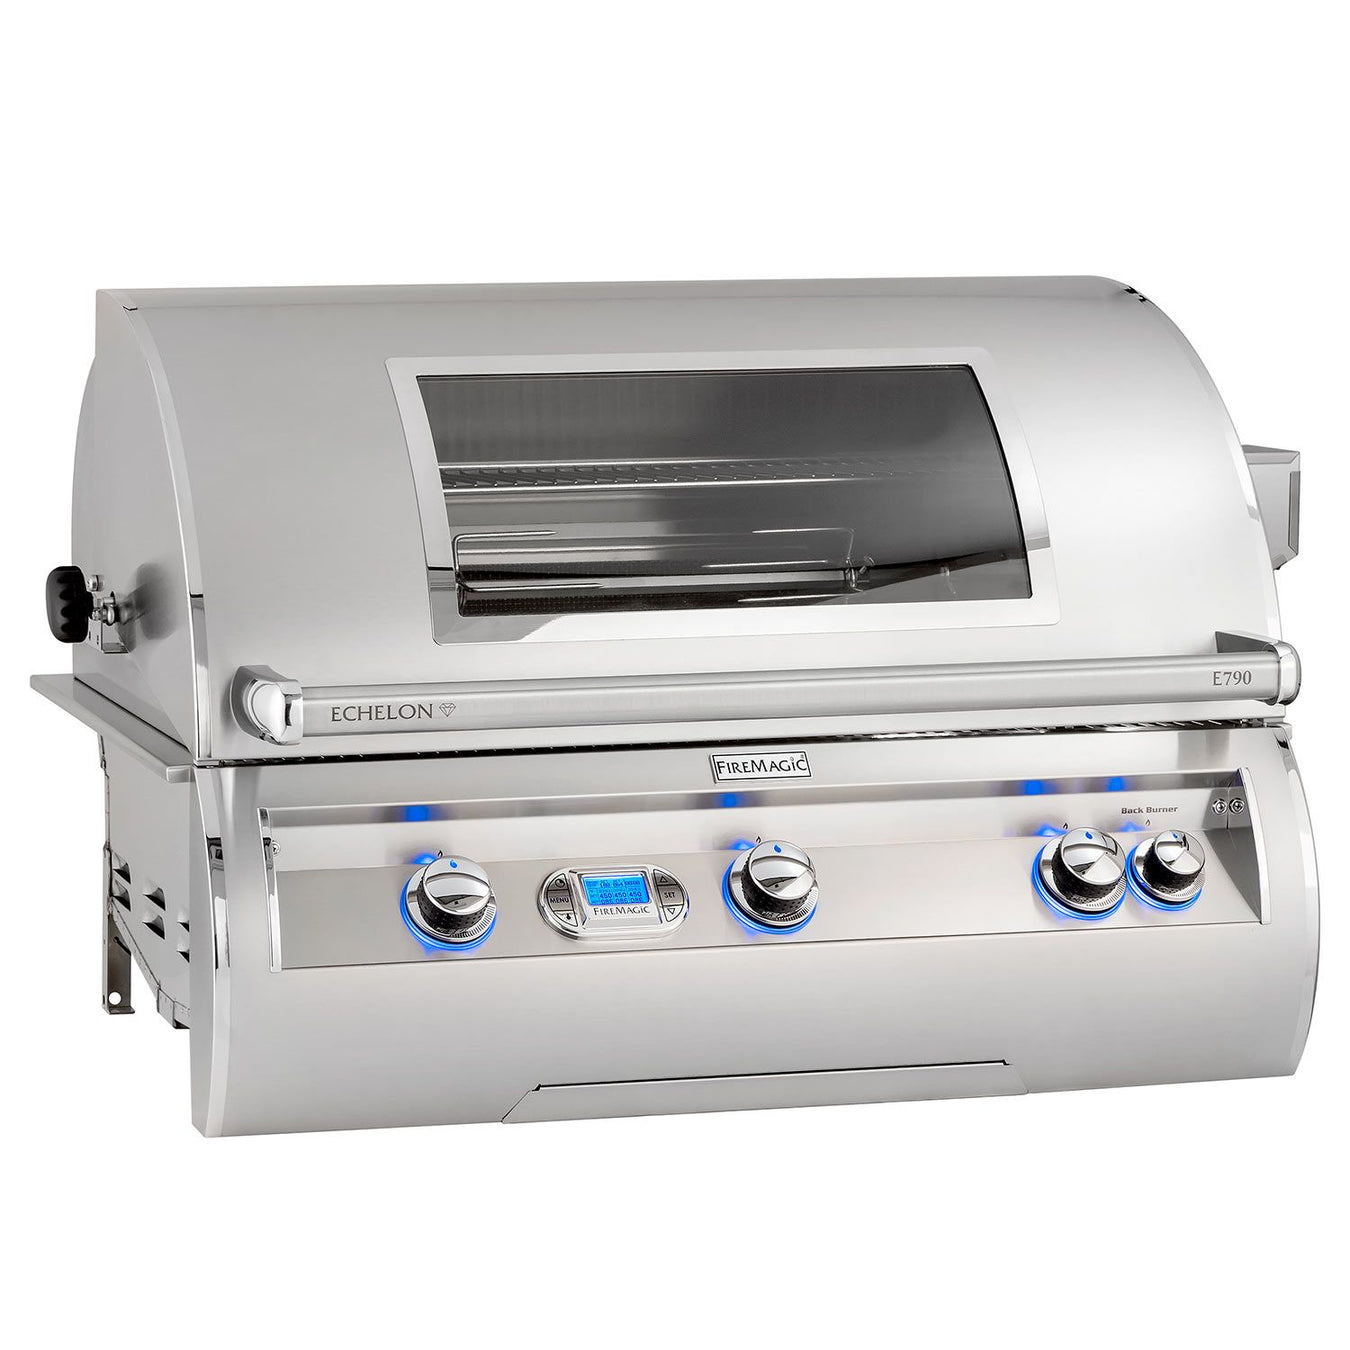 Fire Magic Legacy Regal I Propane Gas Countertop Grill With